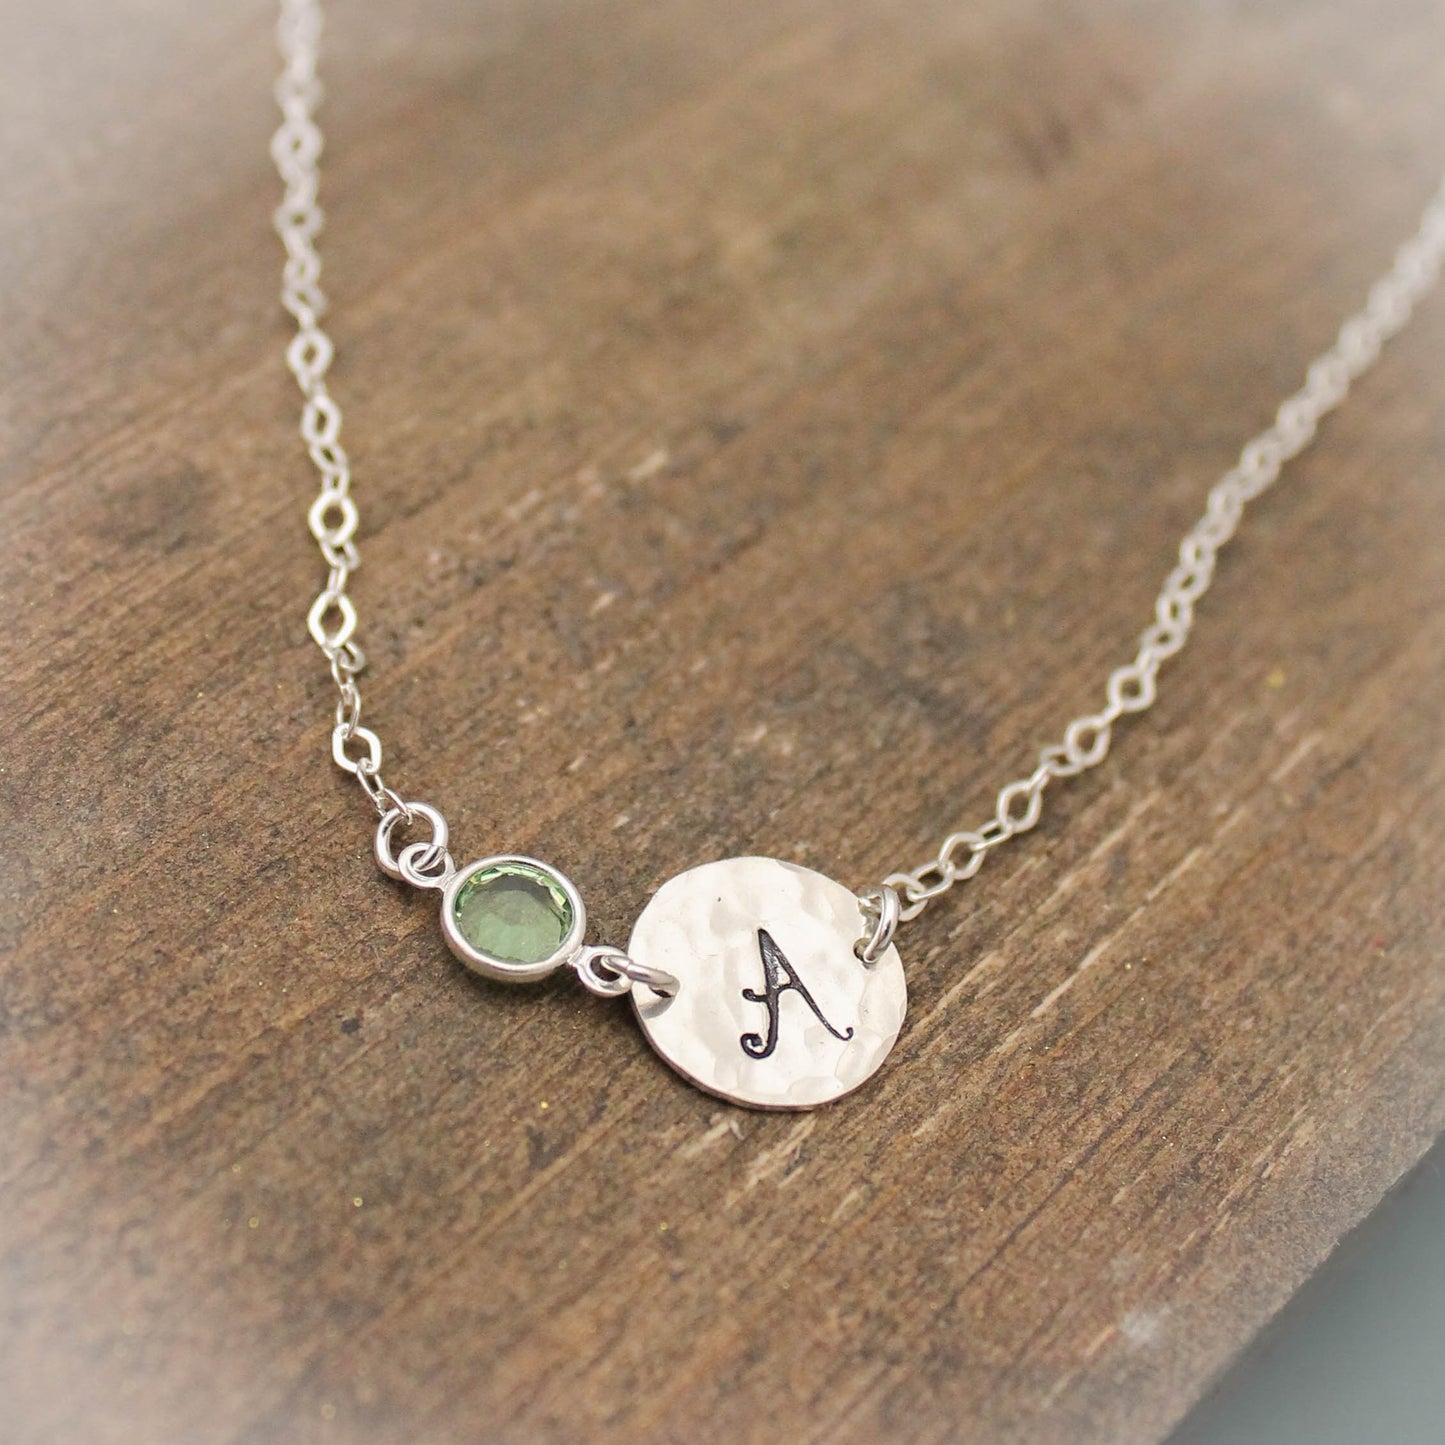 Personalized Initial Birthstone Necklace, Silver Fancy Initial Necklace, Birthstone Necklace, Gift for Her, Personalized Birthday Jewelry